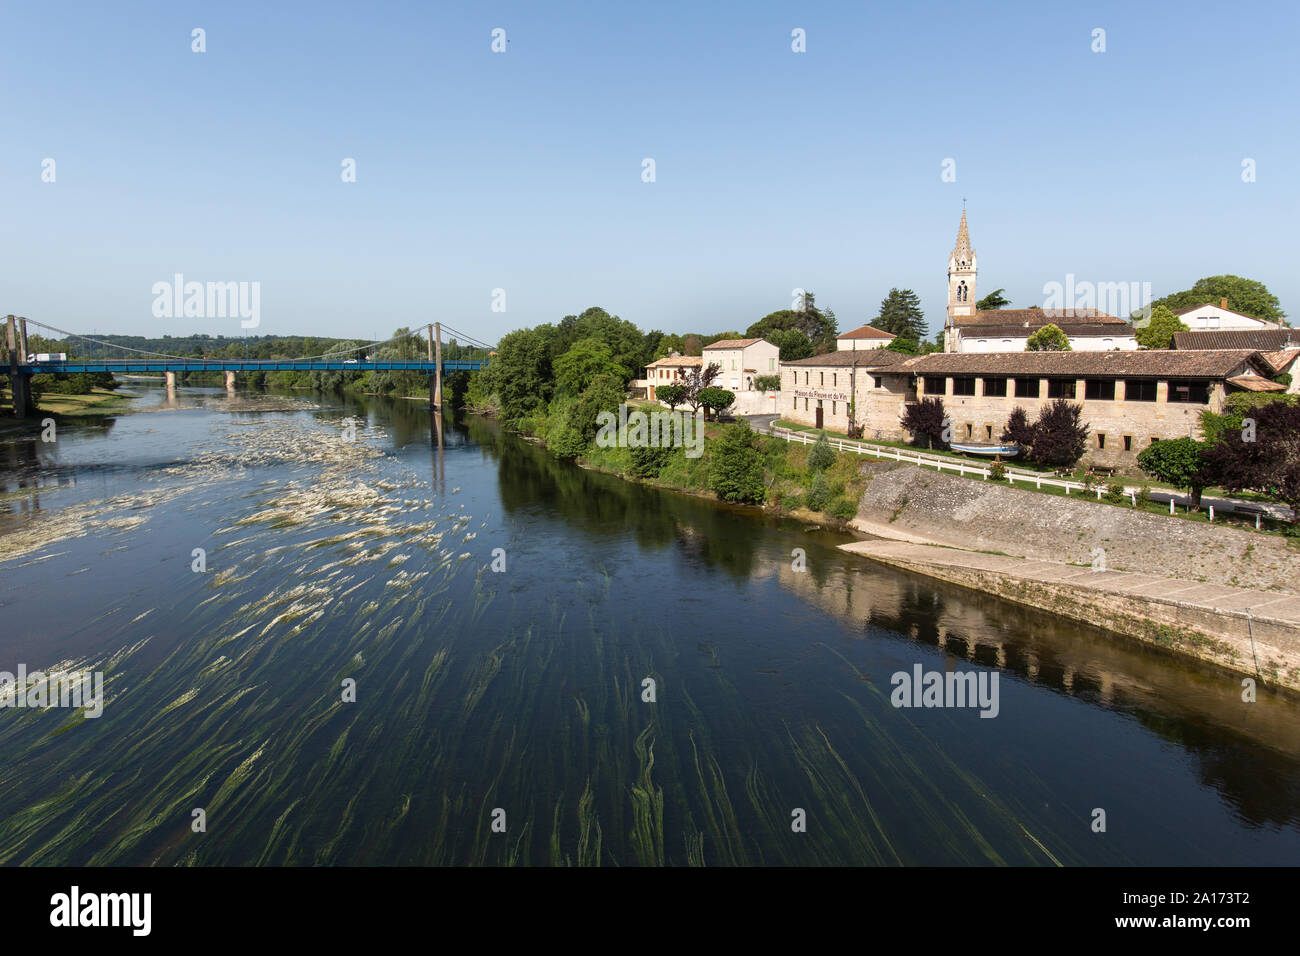 Sainte-Foy-la-Grande, France. Picturesque view of the Dordogne River viewed from the Rue du Pont Bridge, with Port Sainte-Foy on the right. Stock Photo